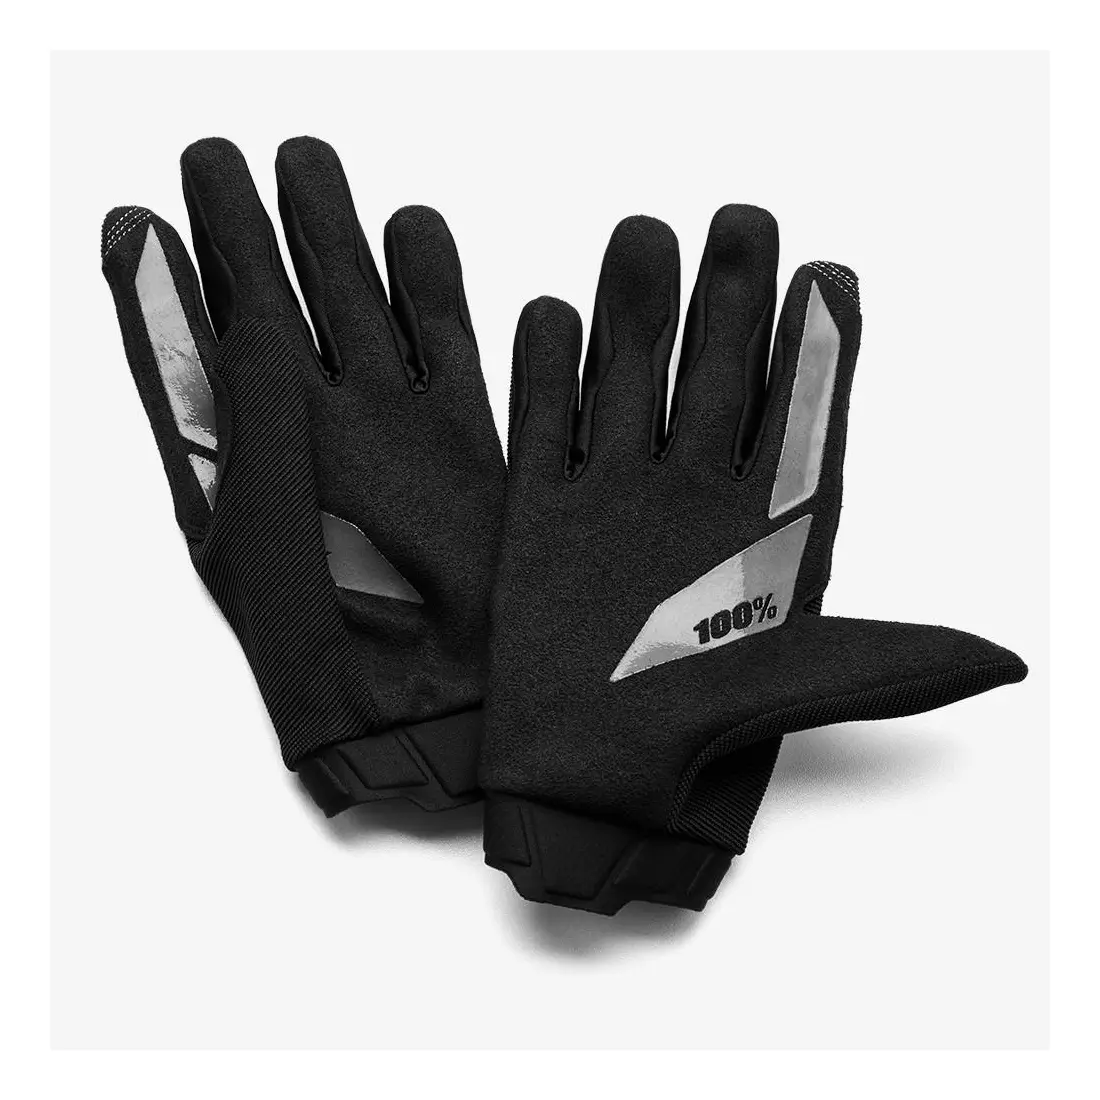 100% women's cycling gloves ridecamp burgundy STO-11018-060-10